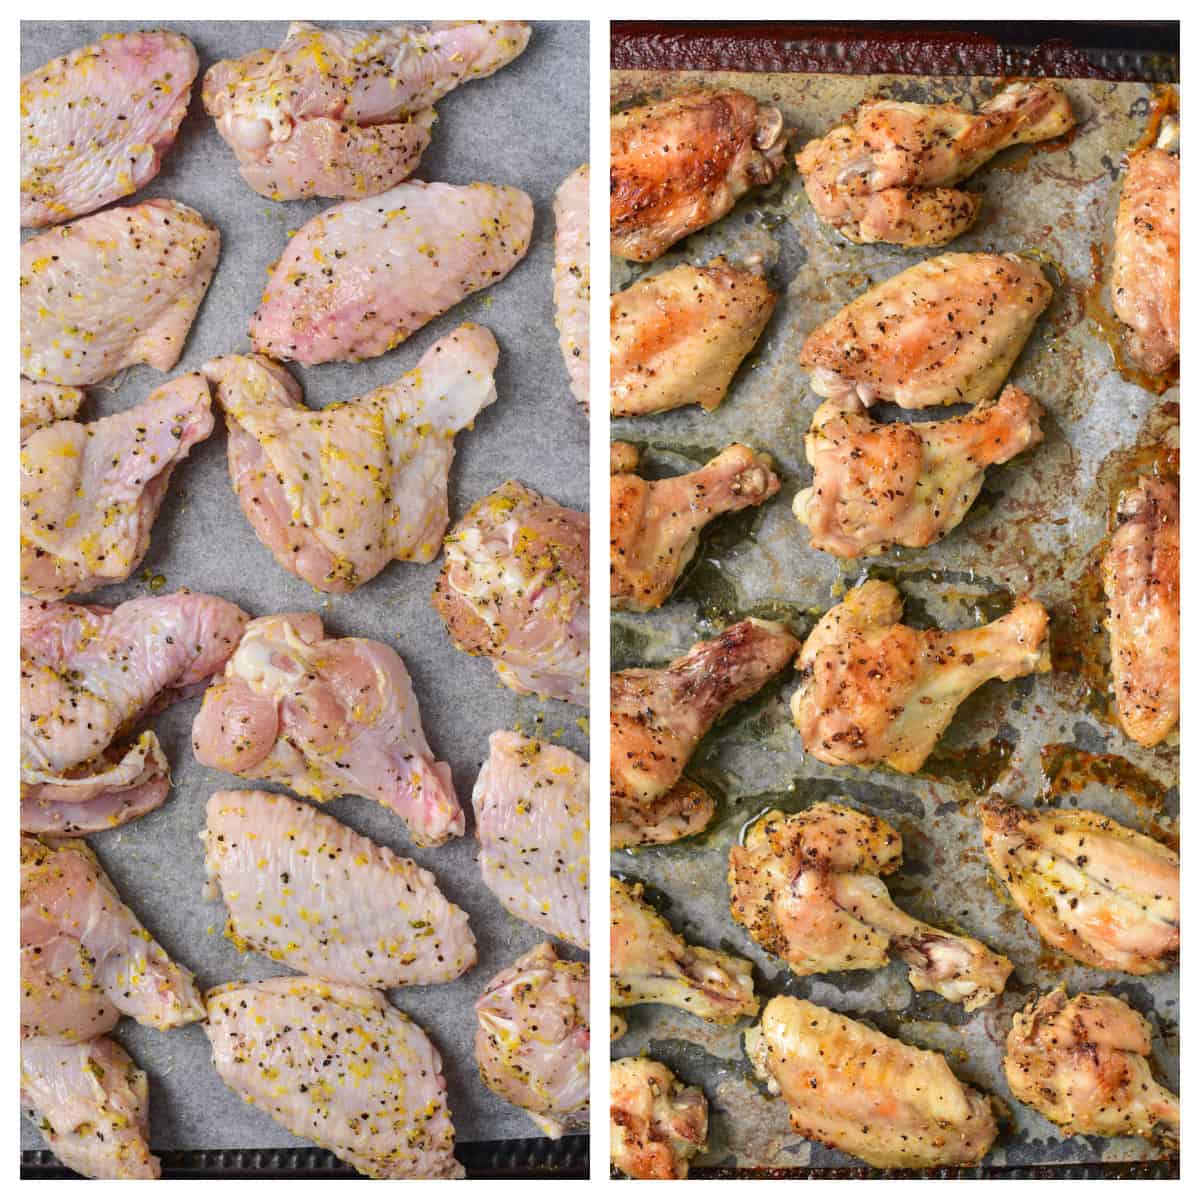 Stages of oven baking wings.